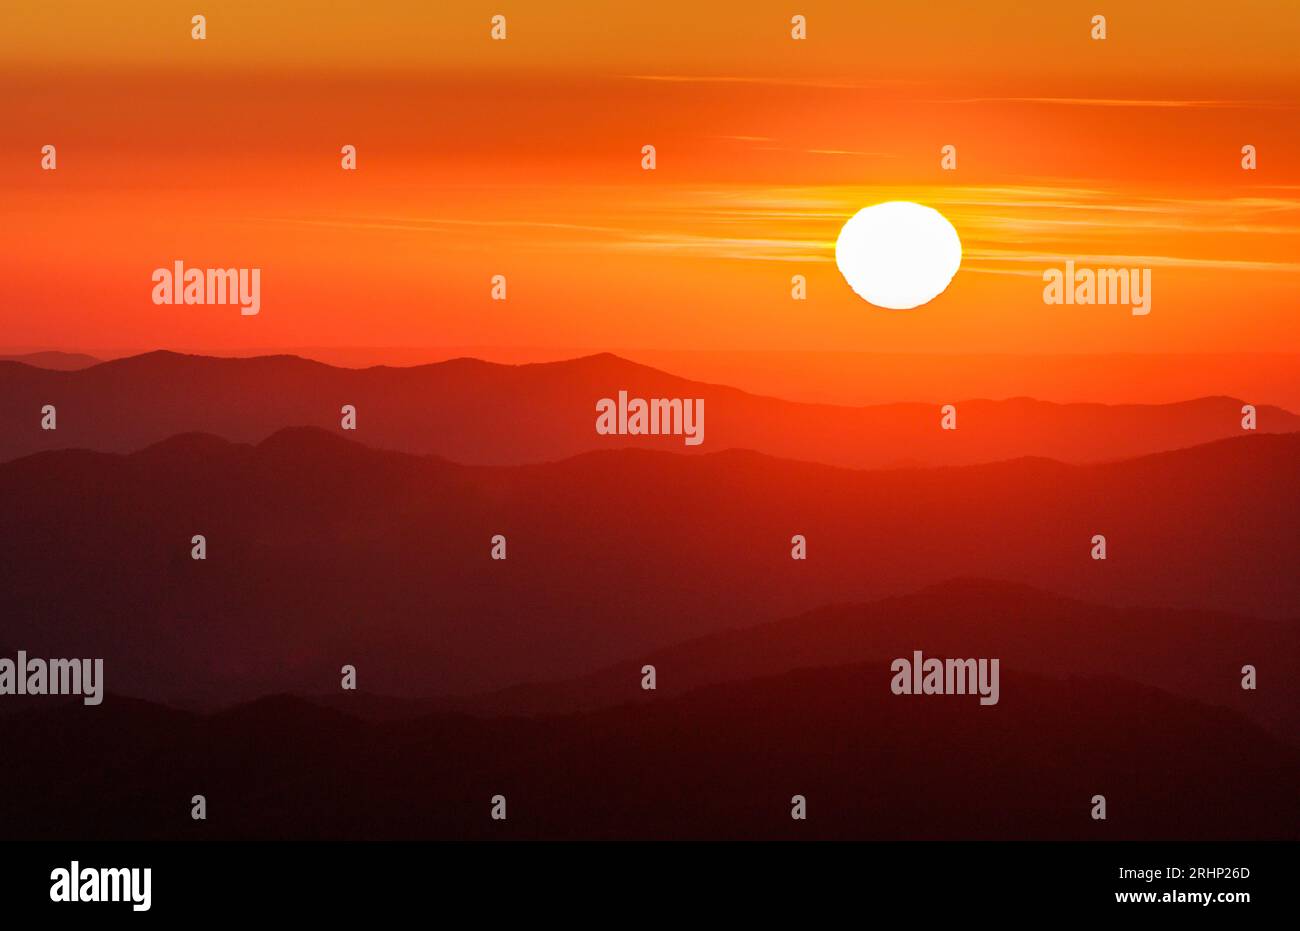 Sunset, Great Smoky Mountains National Park - Swain County, North Carolina. The sun sets behind the layers of mountain ridges visible from Clingmans D Stock Photo